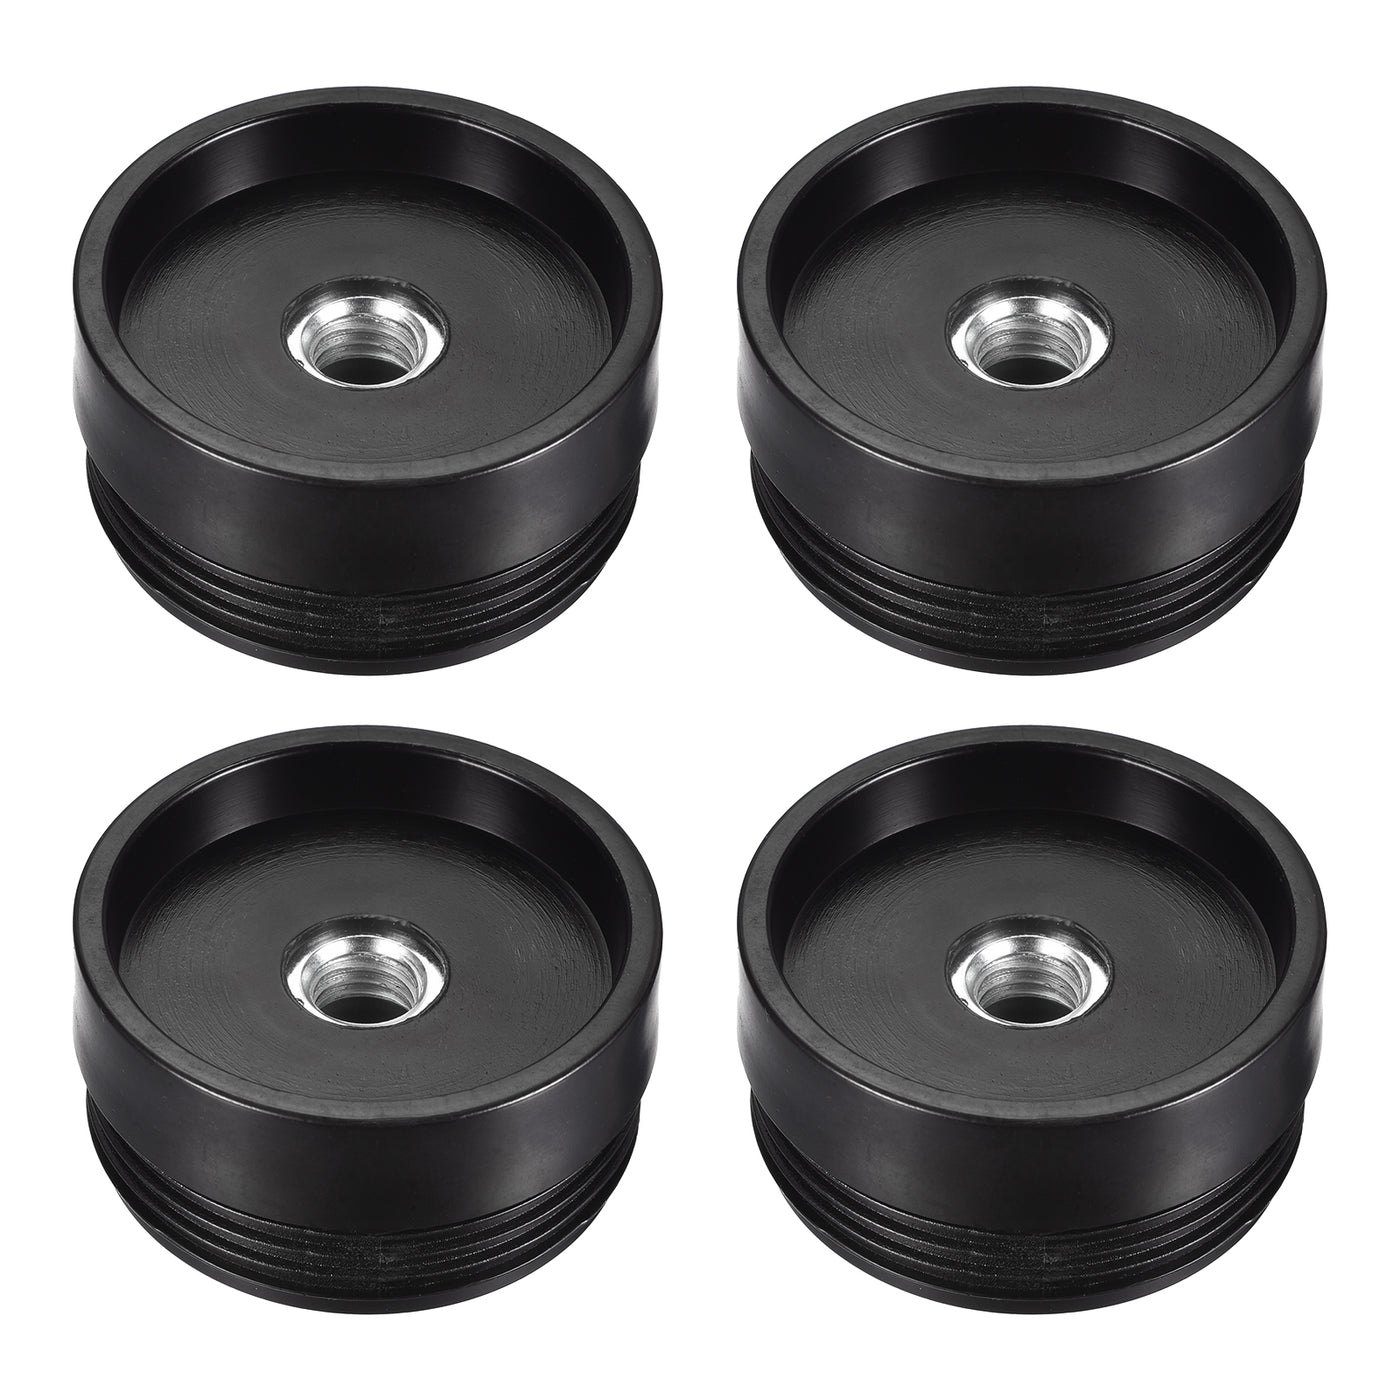 uxcell Uxcell 4Pcs 60mm/2.36" Caster Insert with Thread, Round M12 Thread for Furniture